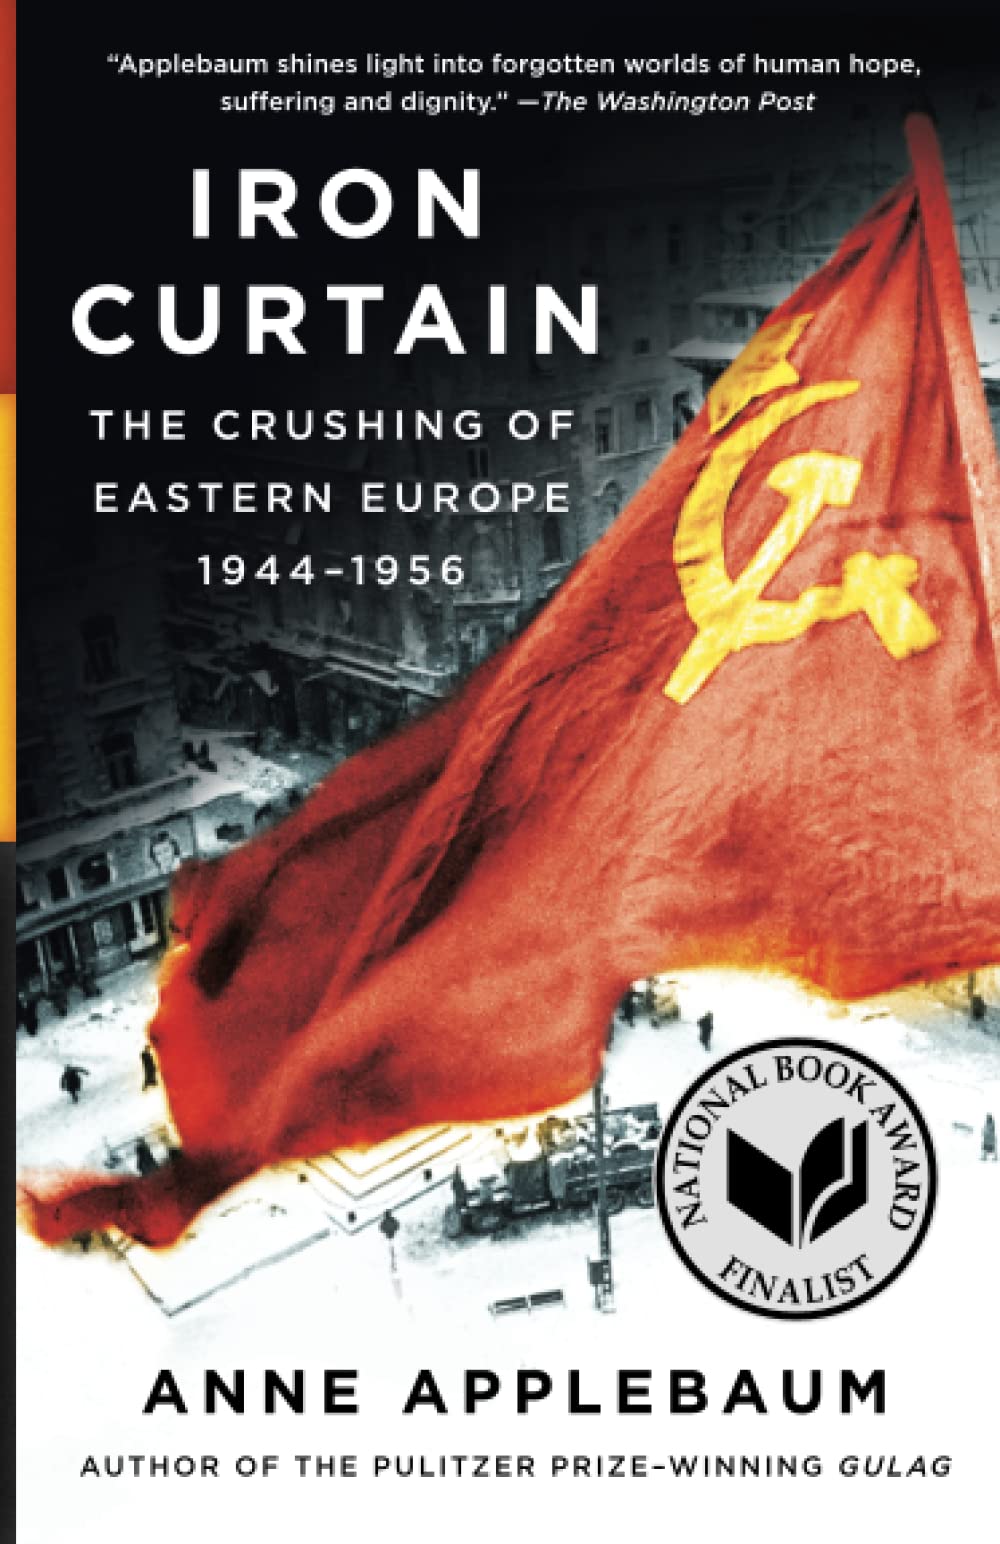 See Iron Curtain in Library Catalog